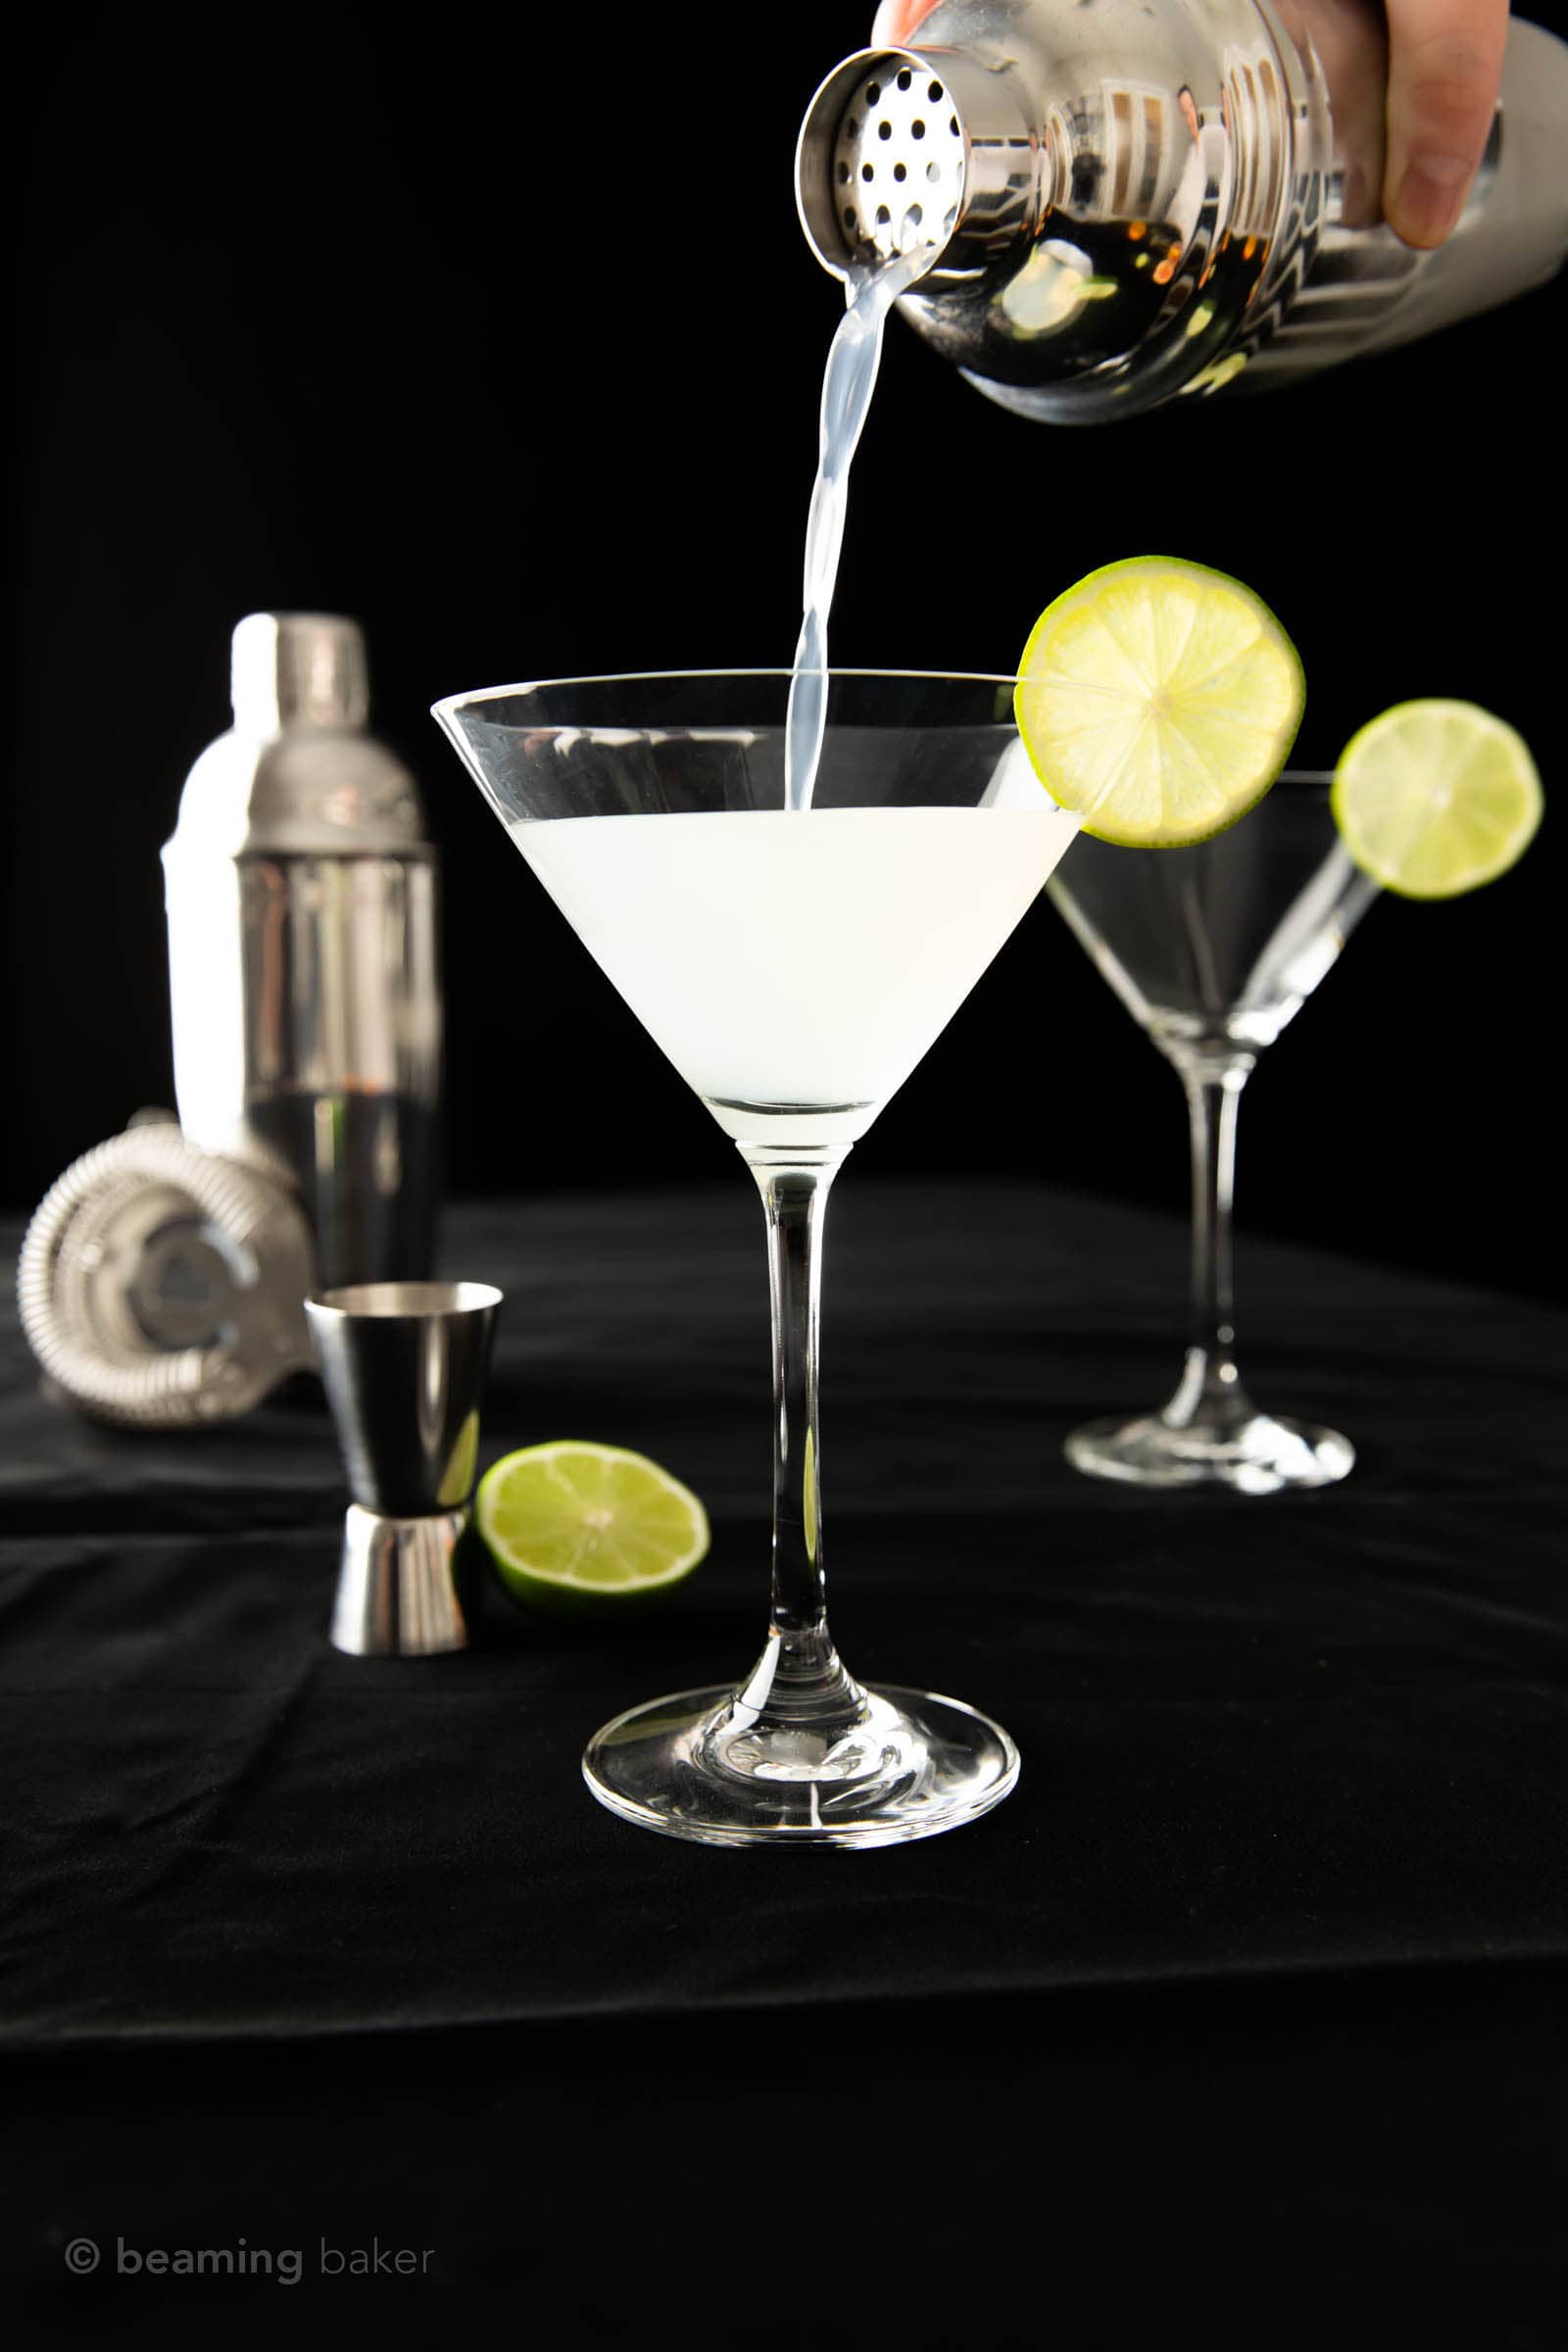 The last pour of gimlet cocktail from a cocktail shaker into one of two martini glasses